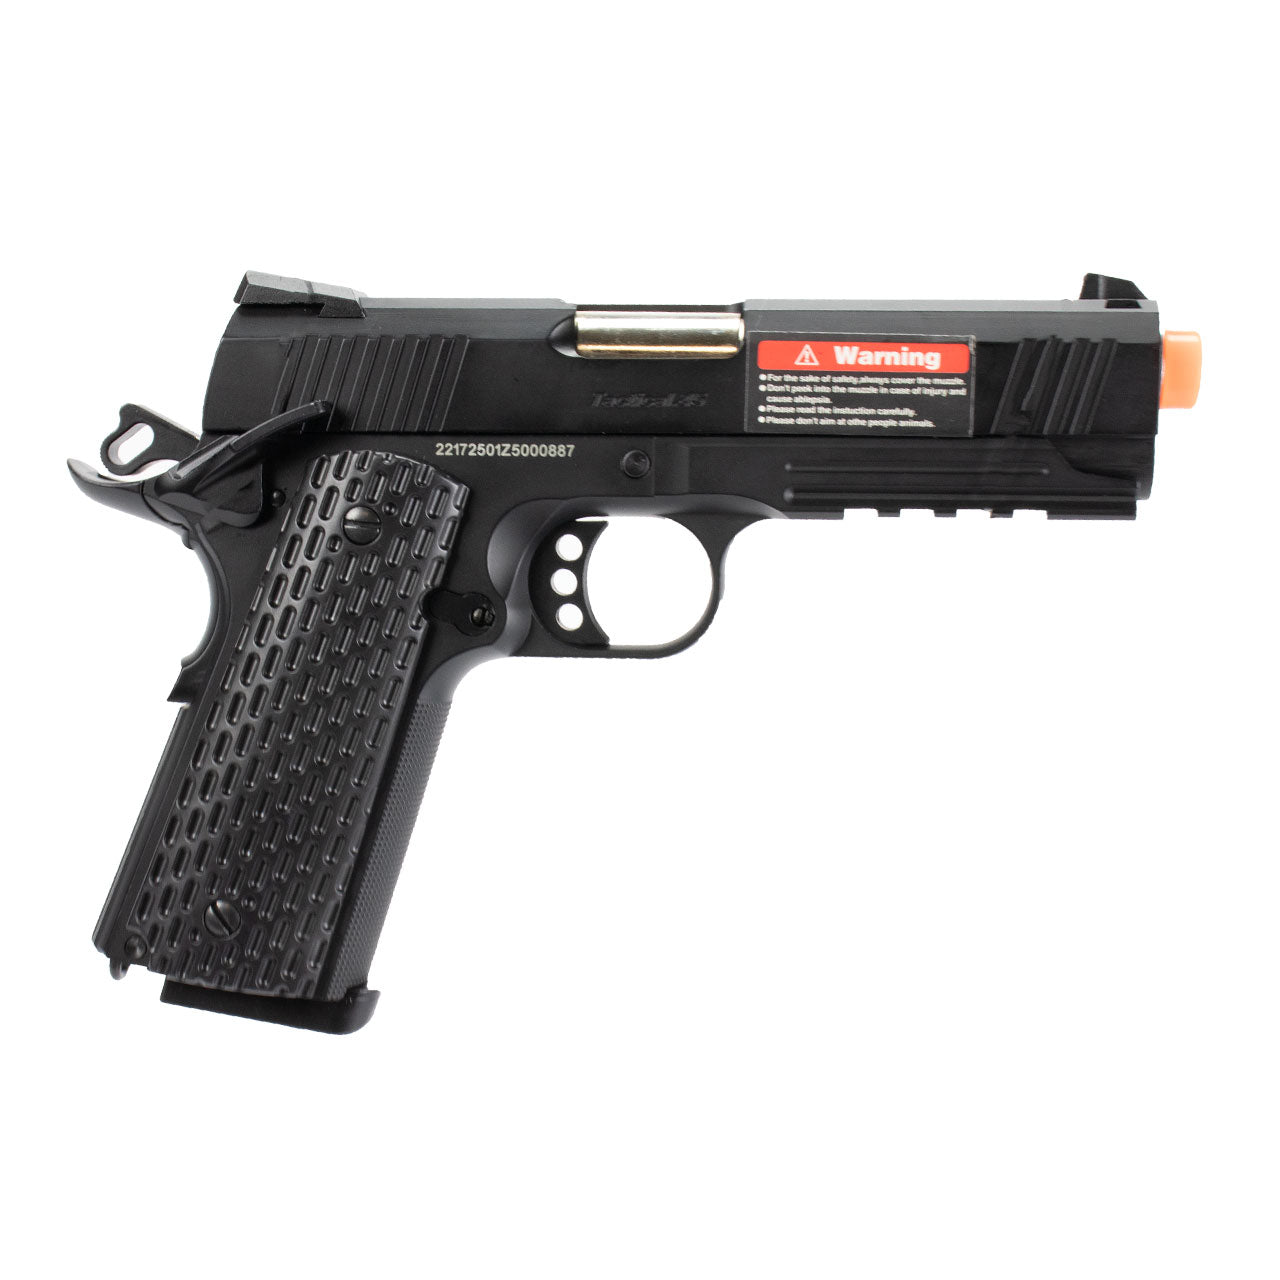 GE / JG OPS 1911 Tactical Full Metal GBB Gas Blow Back Airsoft Pistol